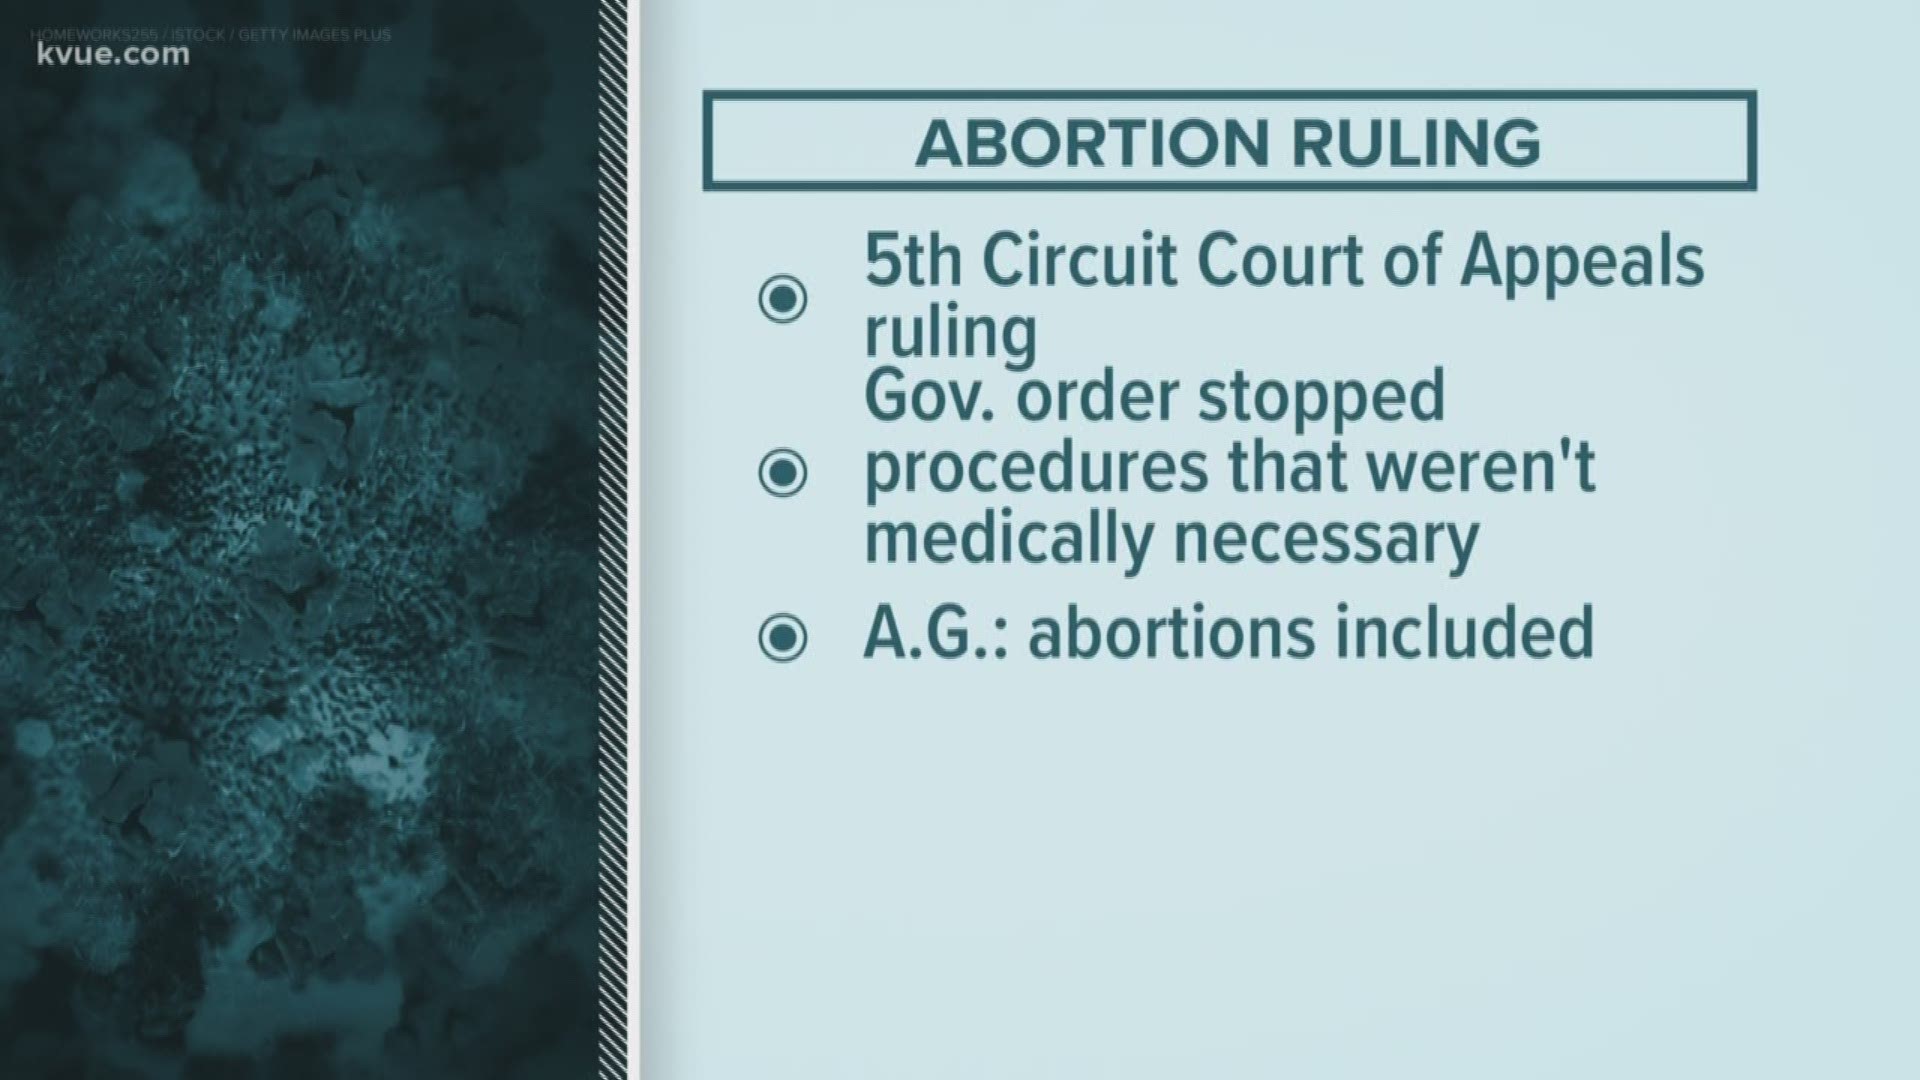 A new ruling will stop most abortion procedures in Texas.